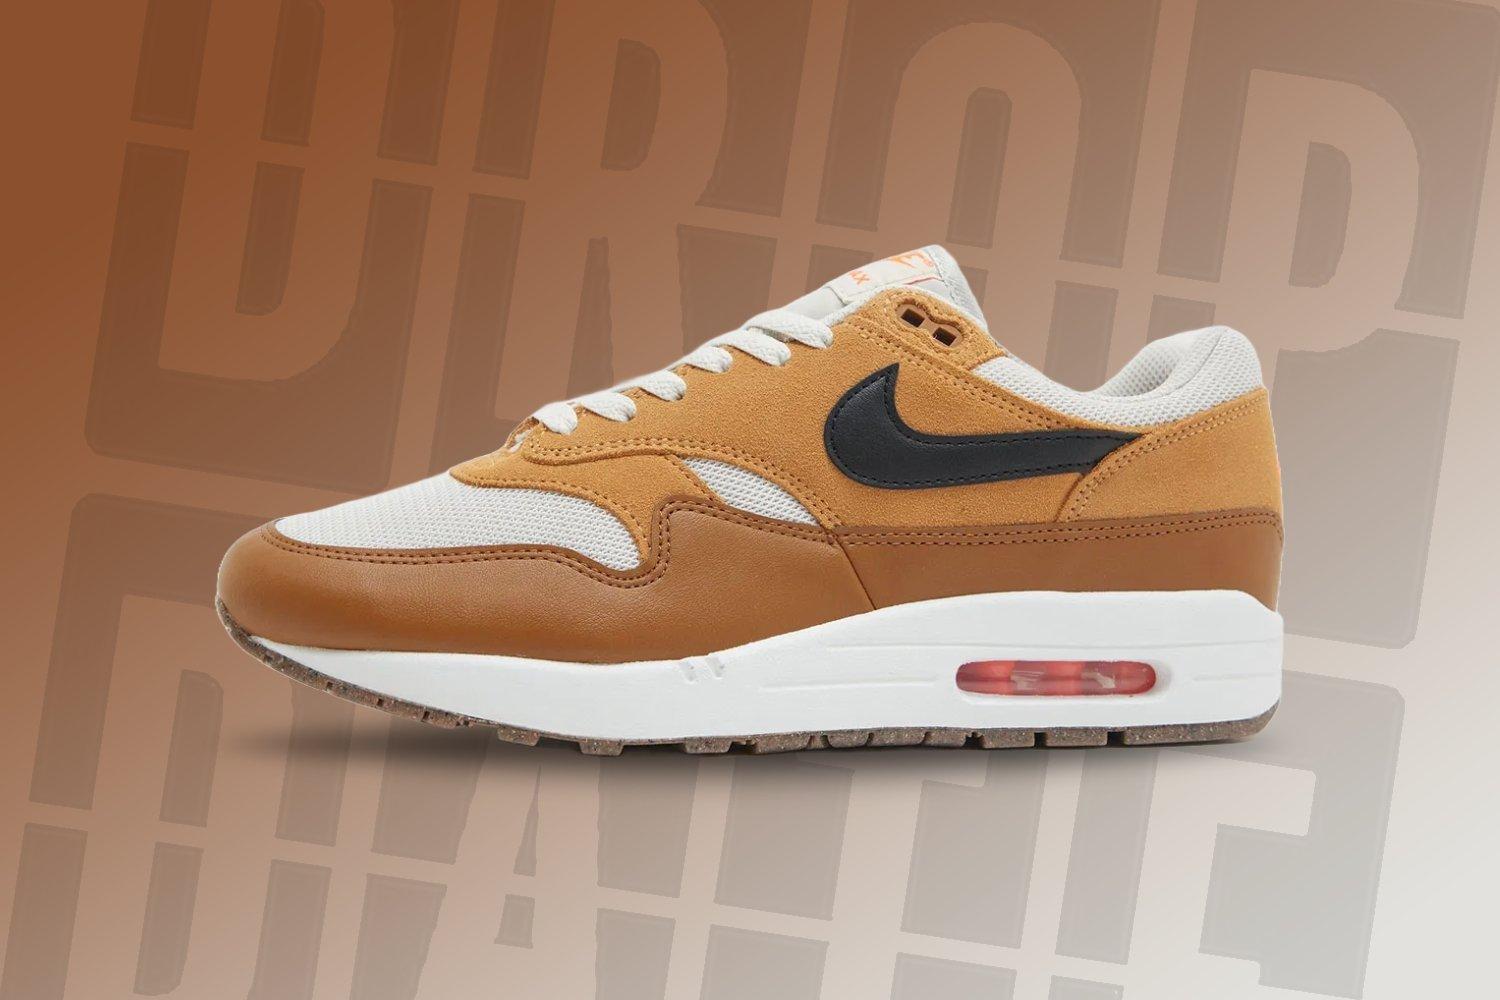 Is the &#8216;Escape&#8217; Colourway Next Up for the Nike Air Max 1?